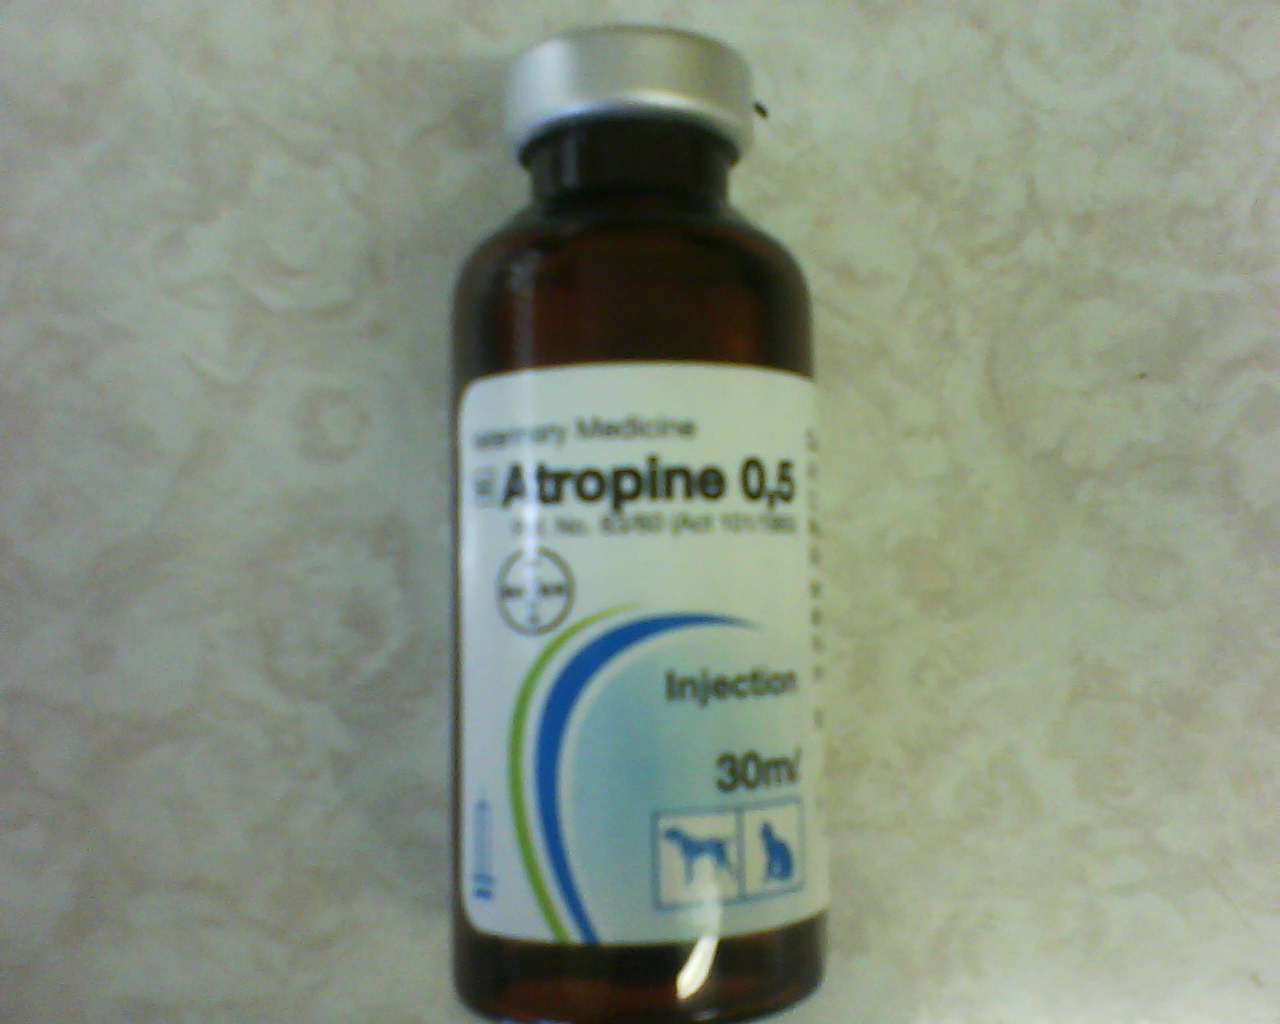 antidote for organophosphate poisoning